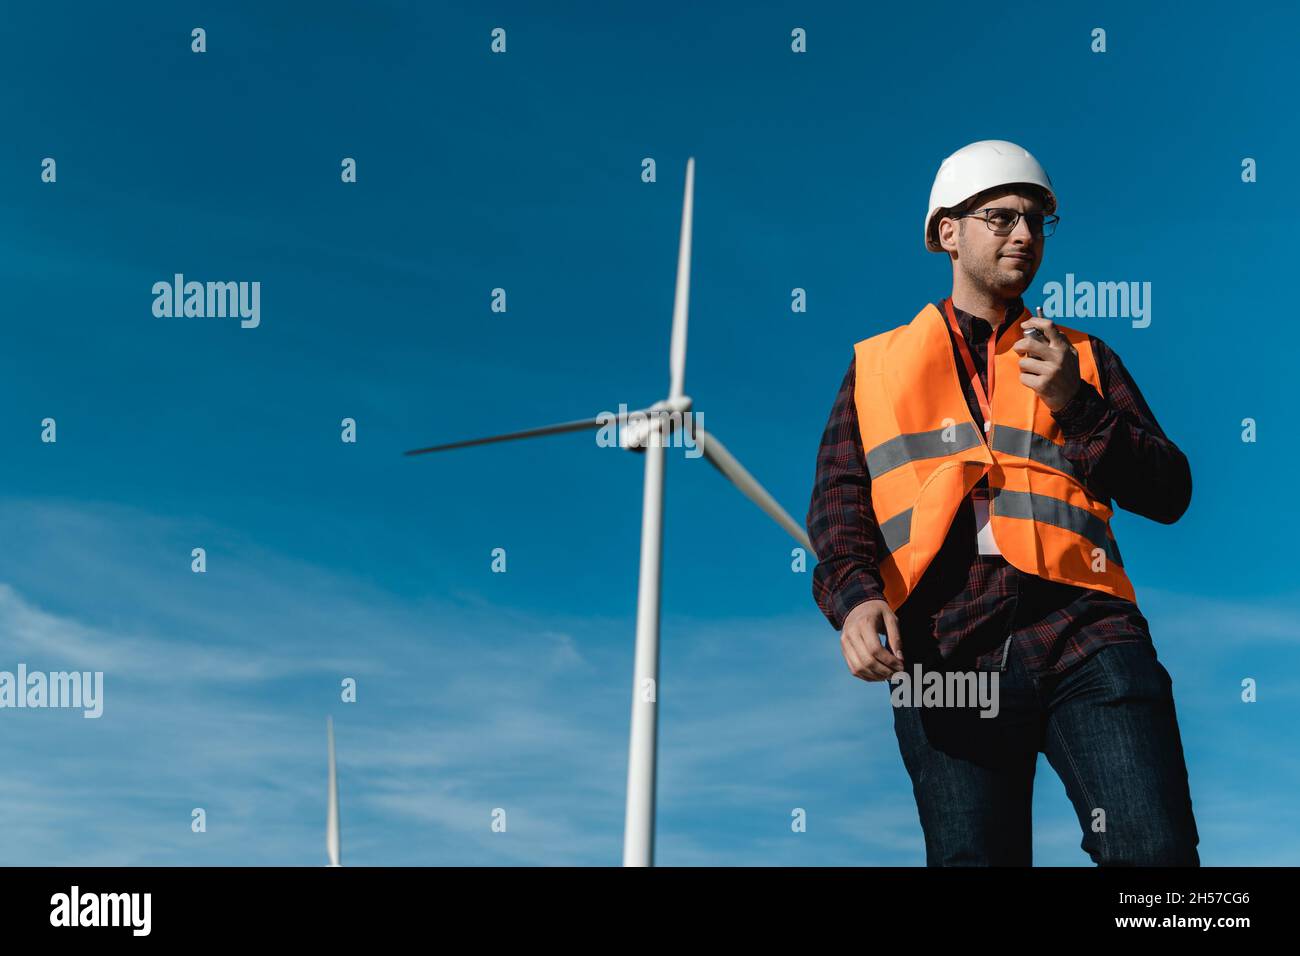 Worker inside sustainable energy industry - Engineer working at alternative renewable wind energy station Stock Photo